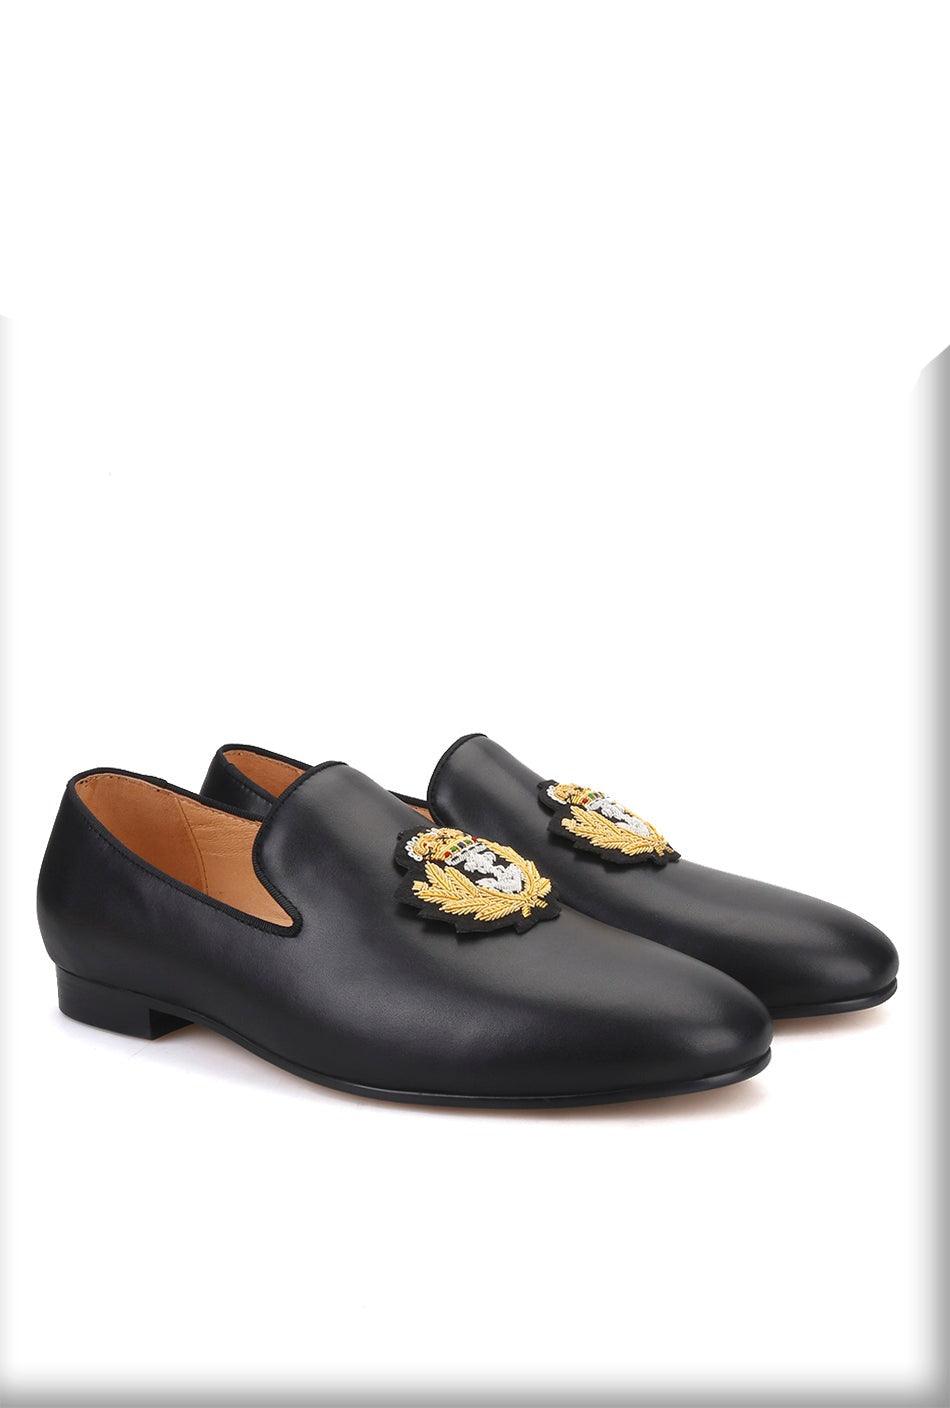 Embroidered Leather Men Loafers - Men Shoes - Loafer Shoes - Guocali